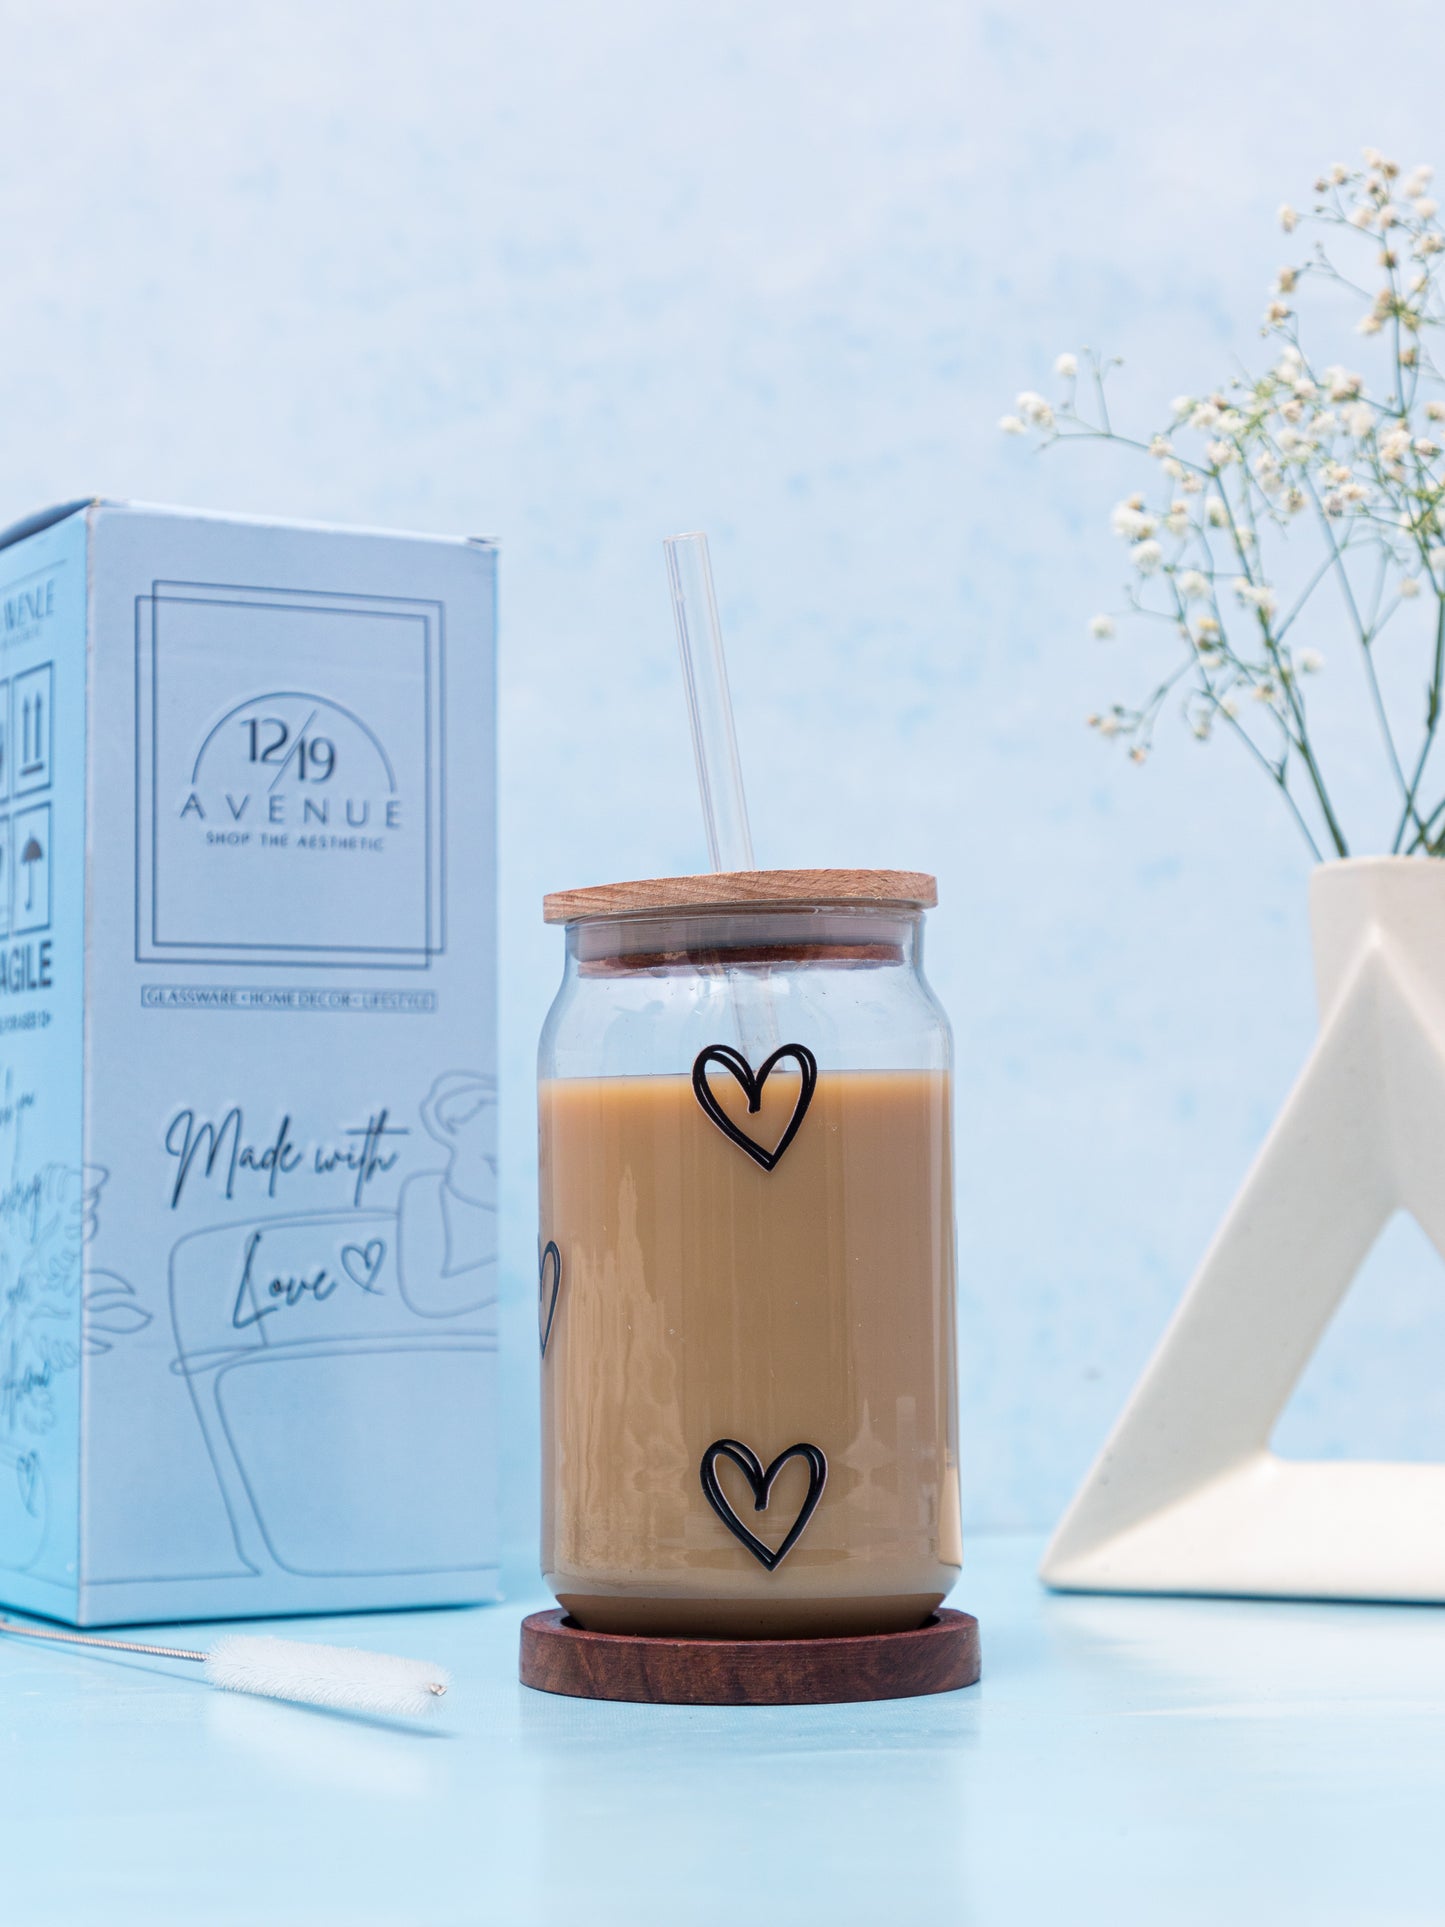 Can Shaped Sipper 500ml| Scribbled Heart | 18oz Can Tumbler with lid, straw and coaster.